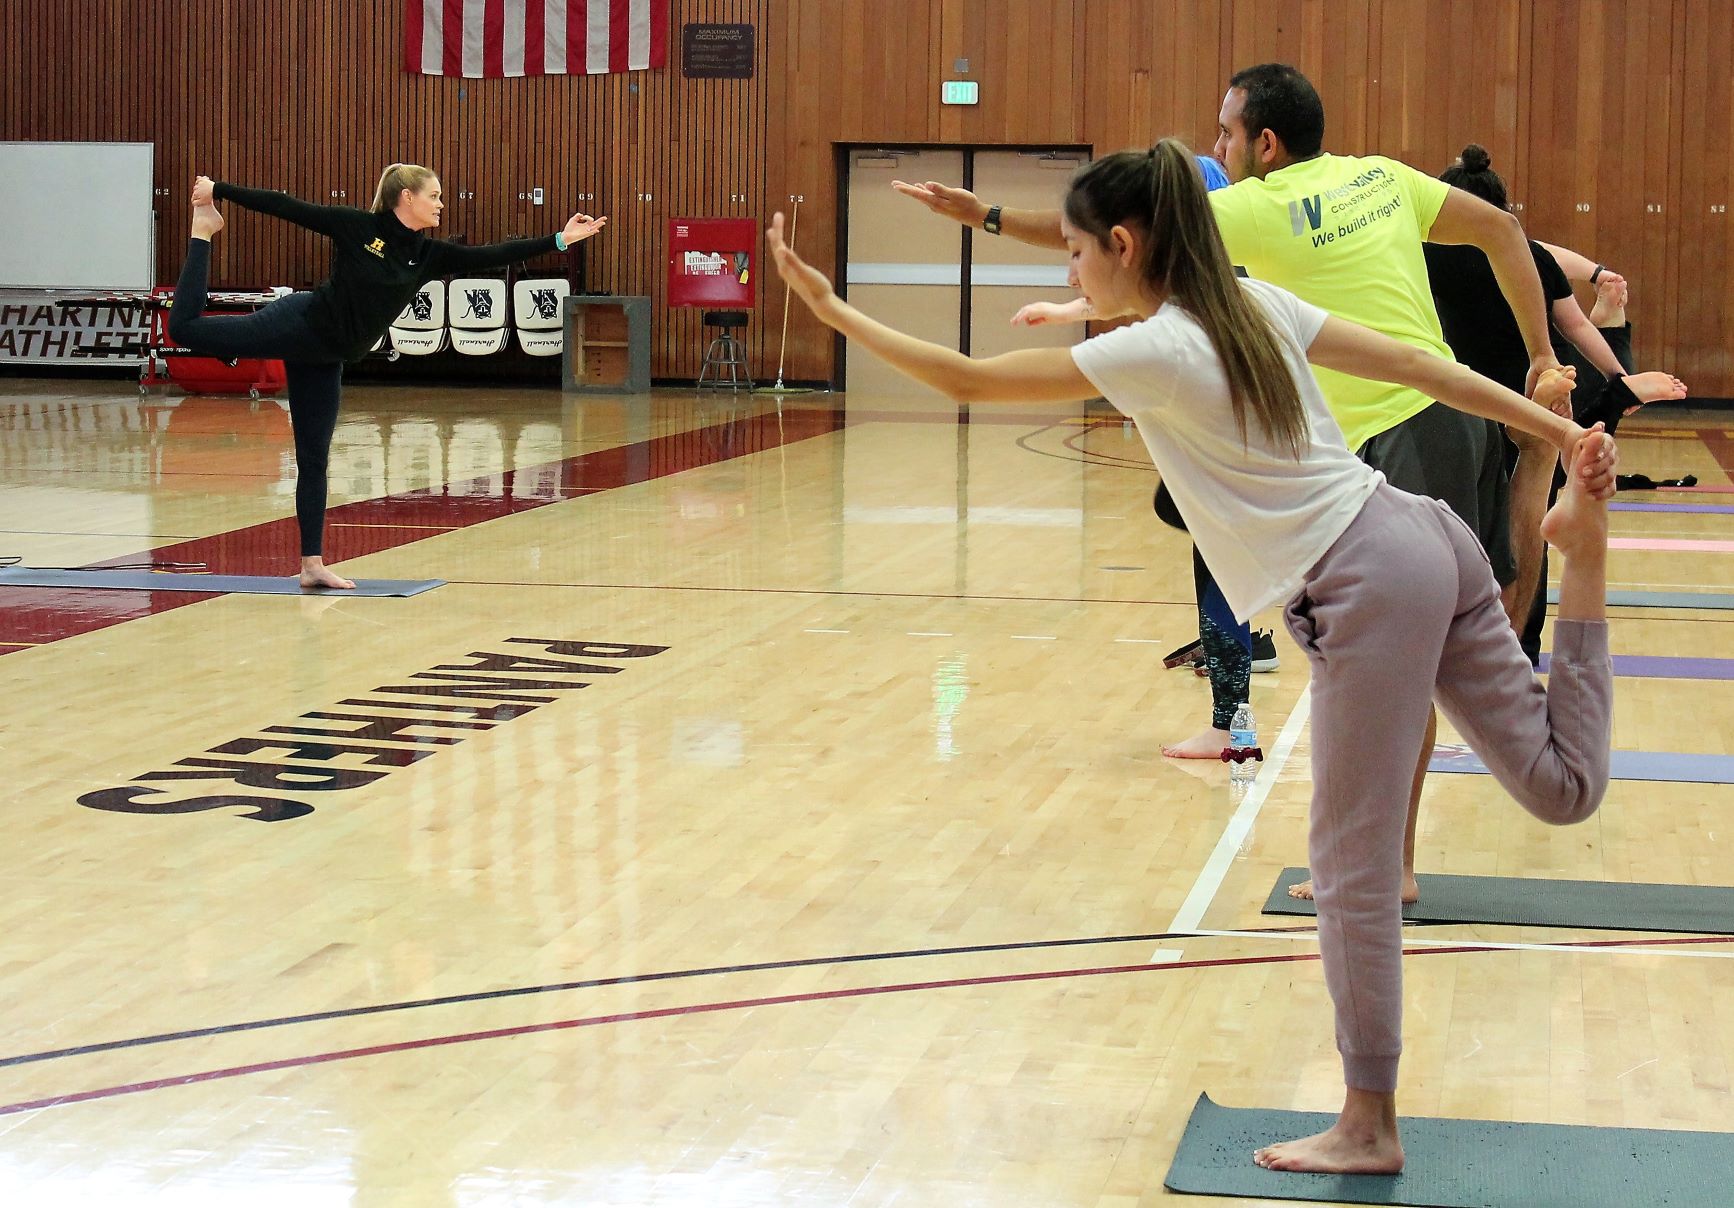 Instructor leads students in yoga class.